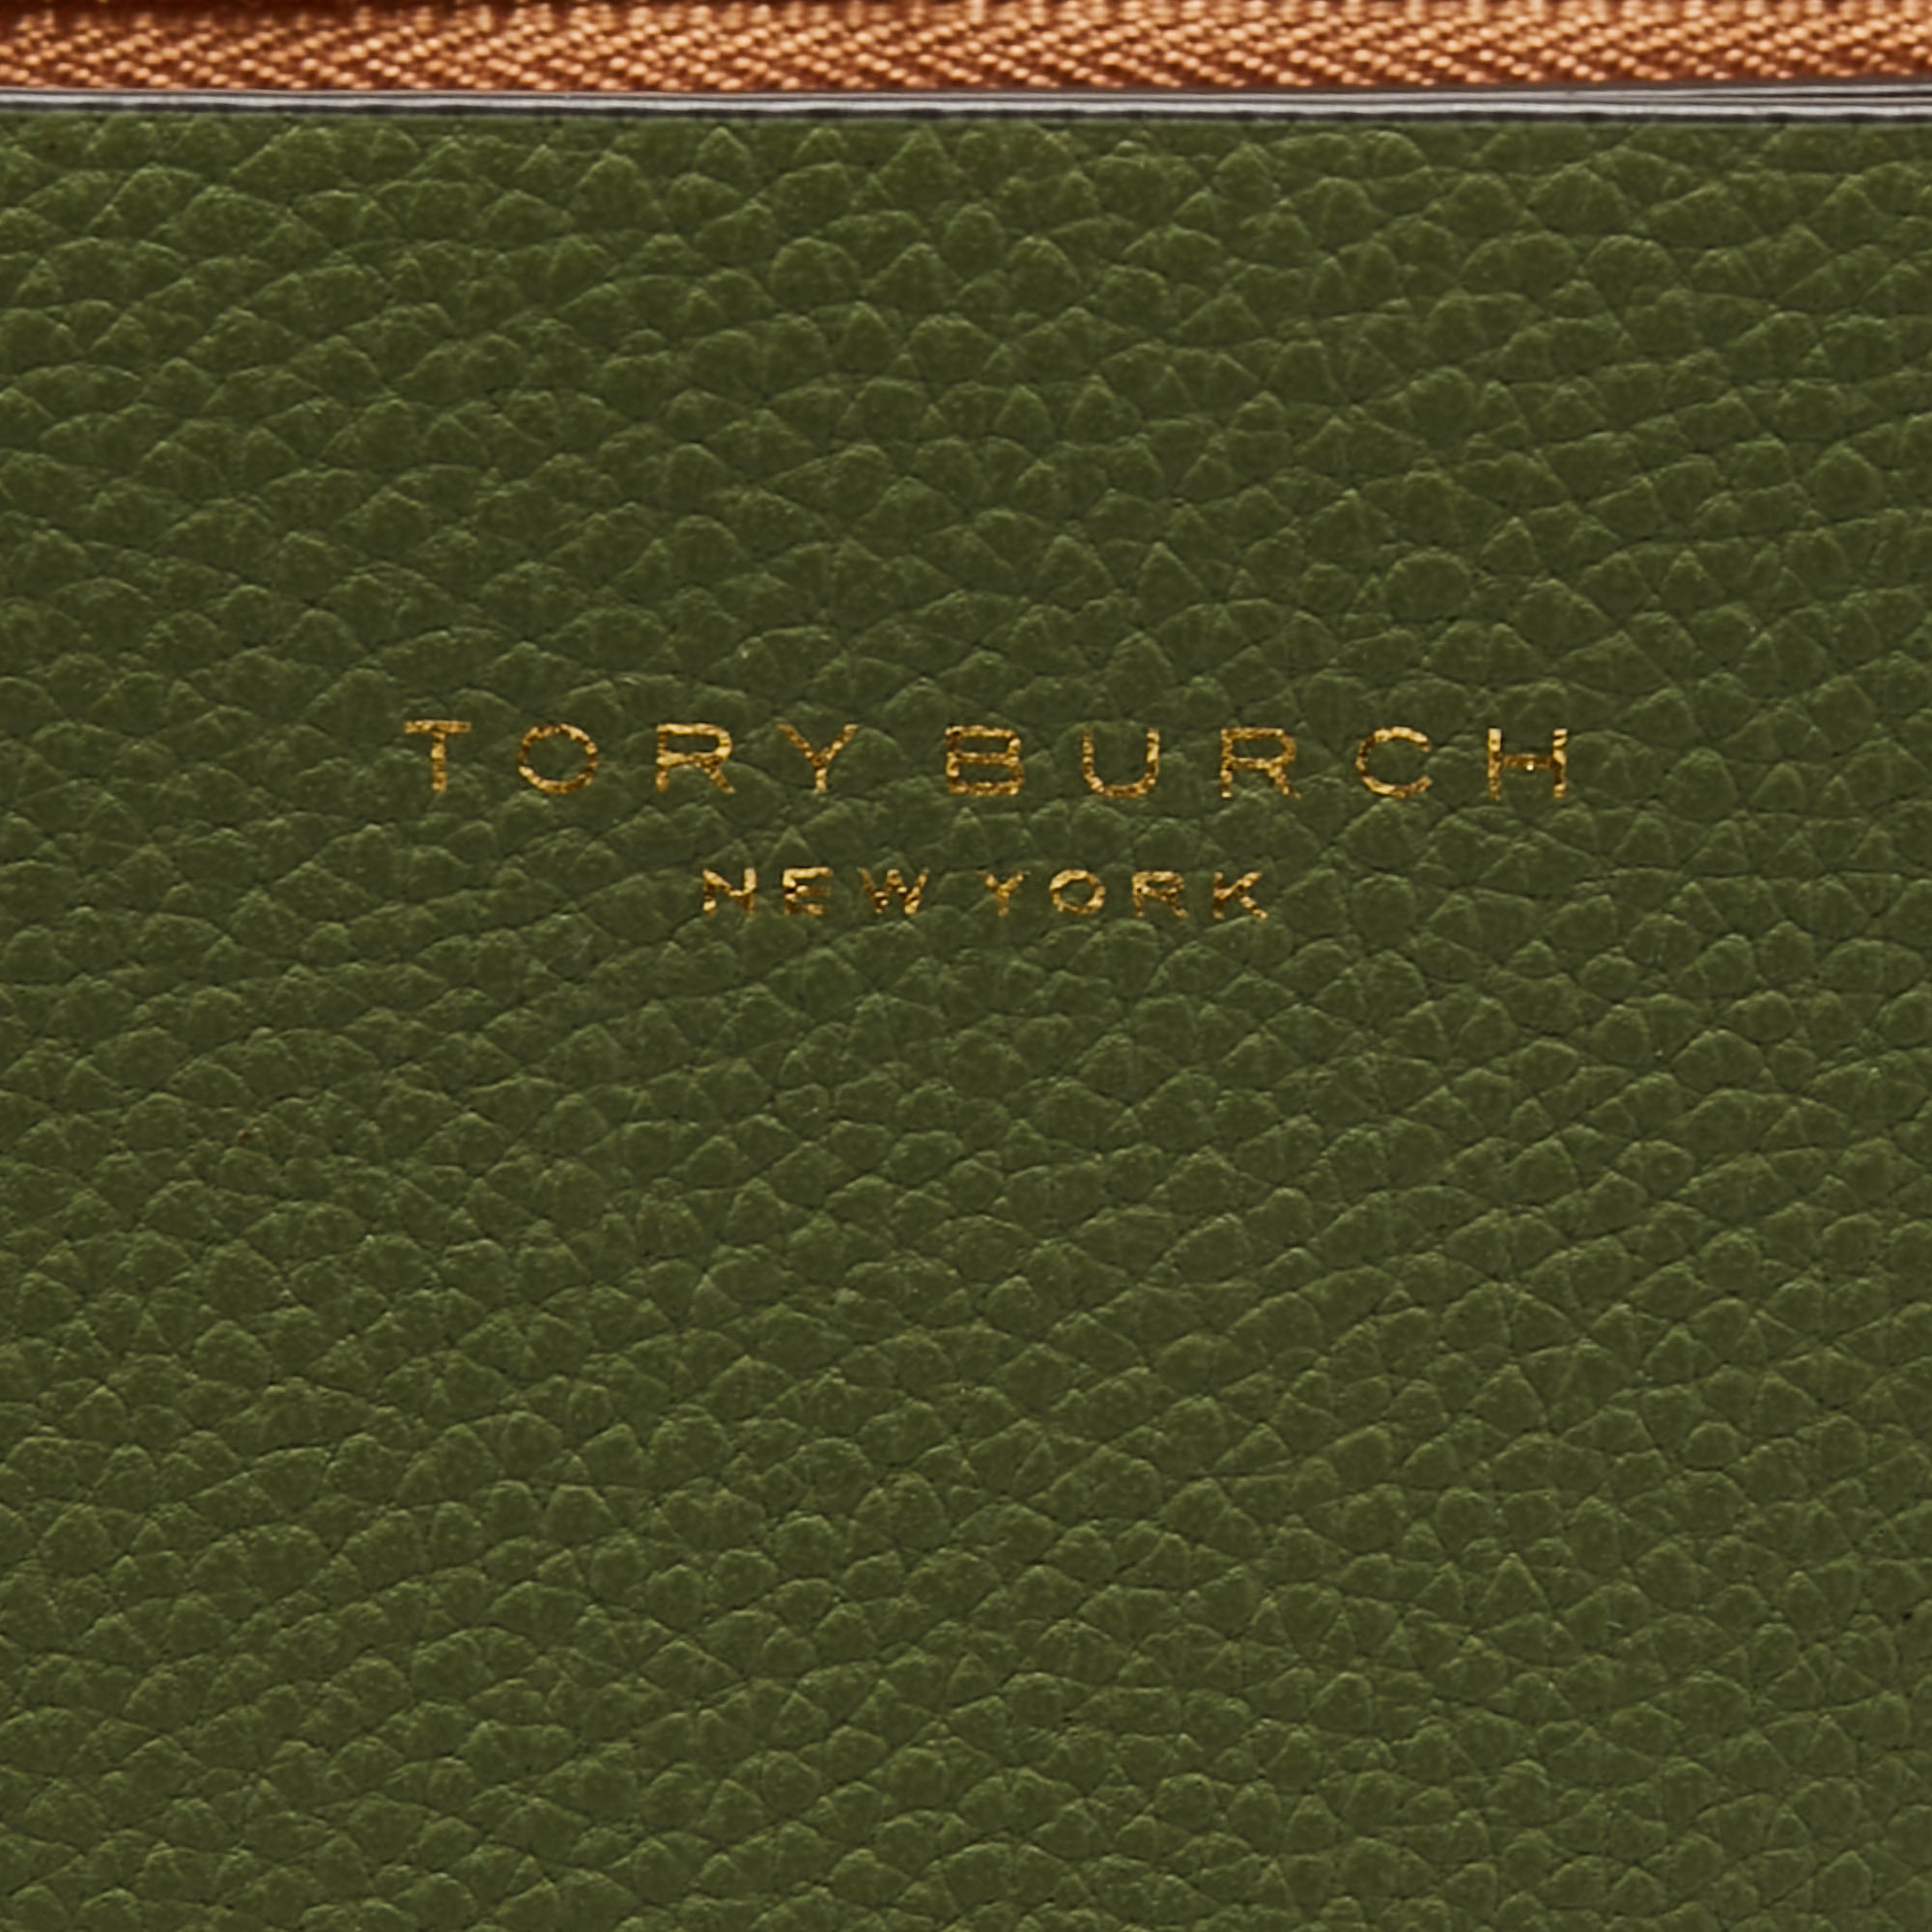 Tory Burch Green Perry Small Triple-Compartment Tote at FORZIERI